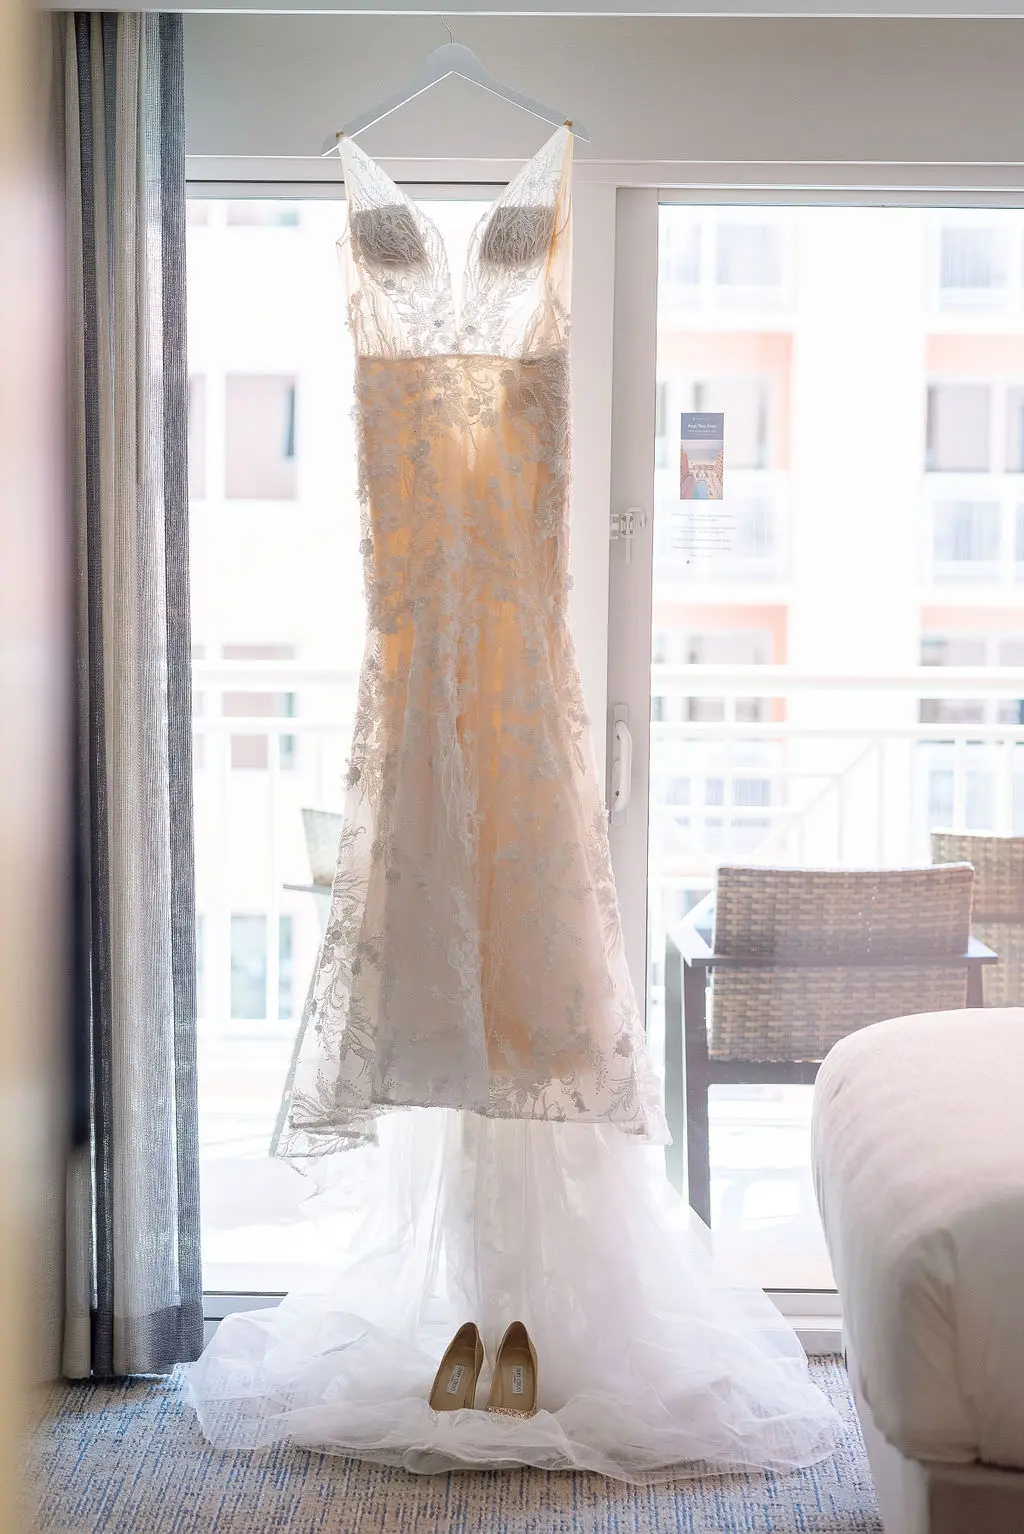 Sheer Dress Lace Calle Blanche and Beaded Fit and Flare Wedding Dress